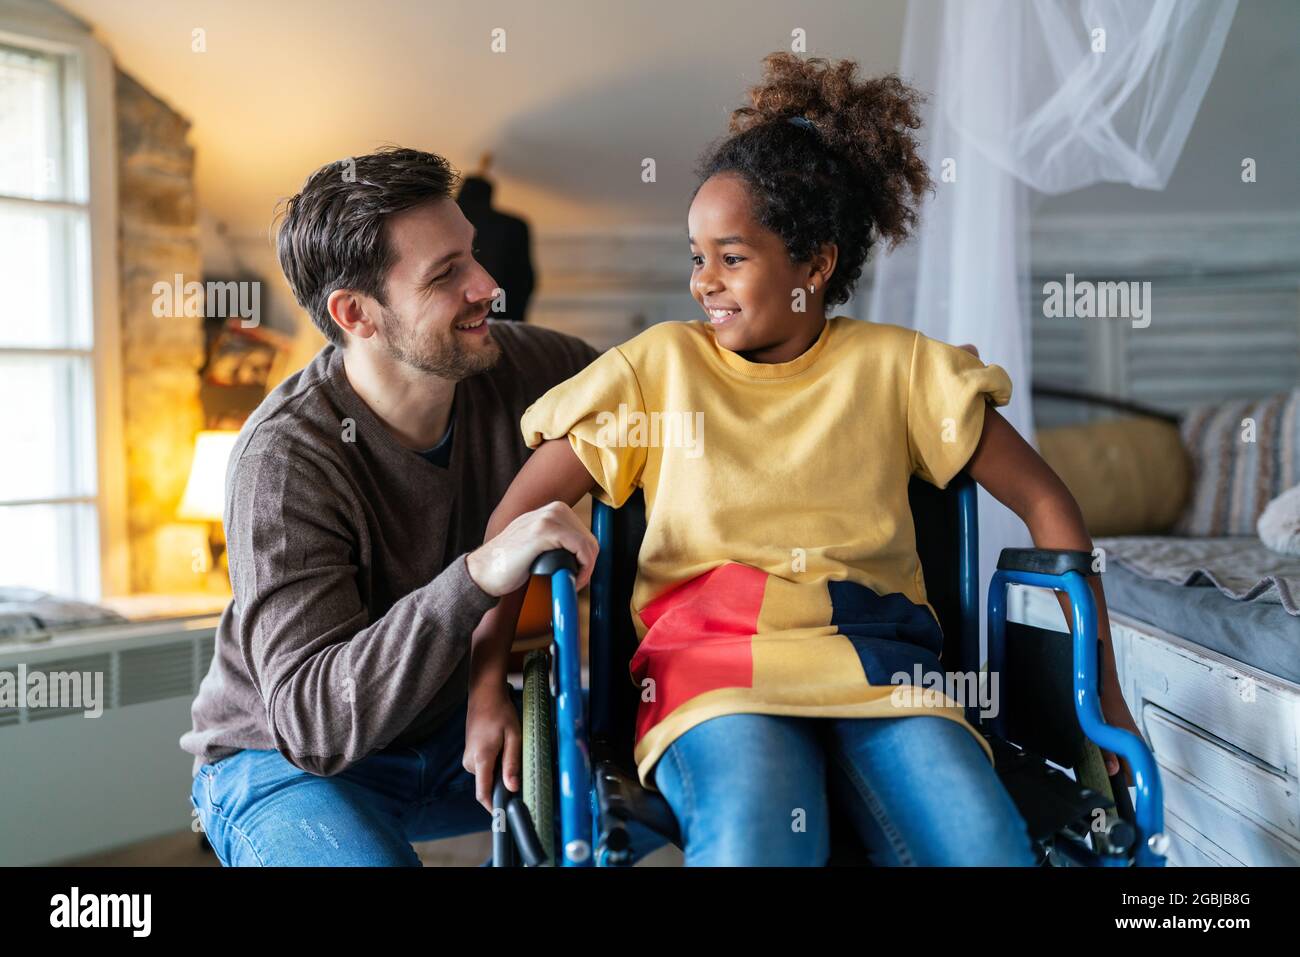 Happy multiethnic family. Smiling little girl with disability in wheelchair Stock Photo